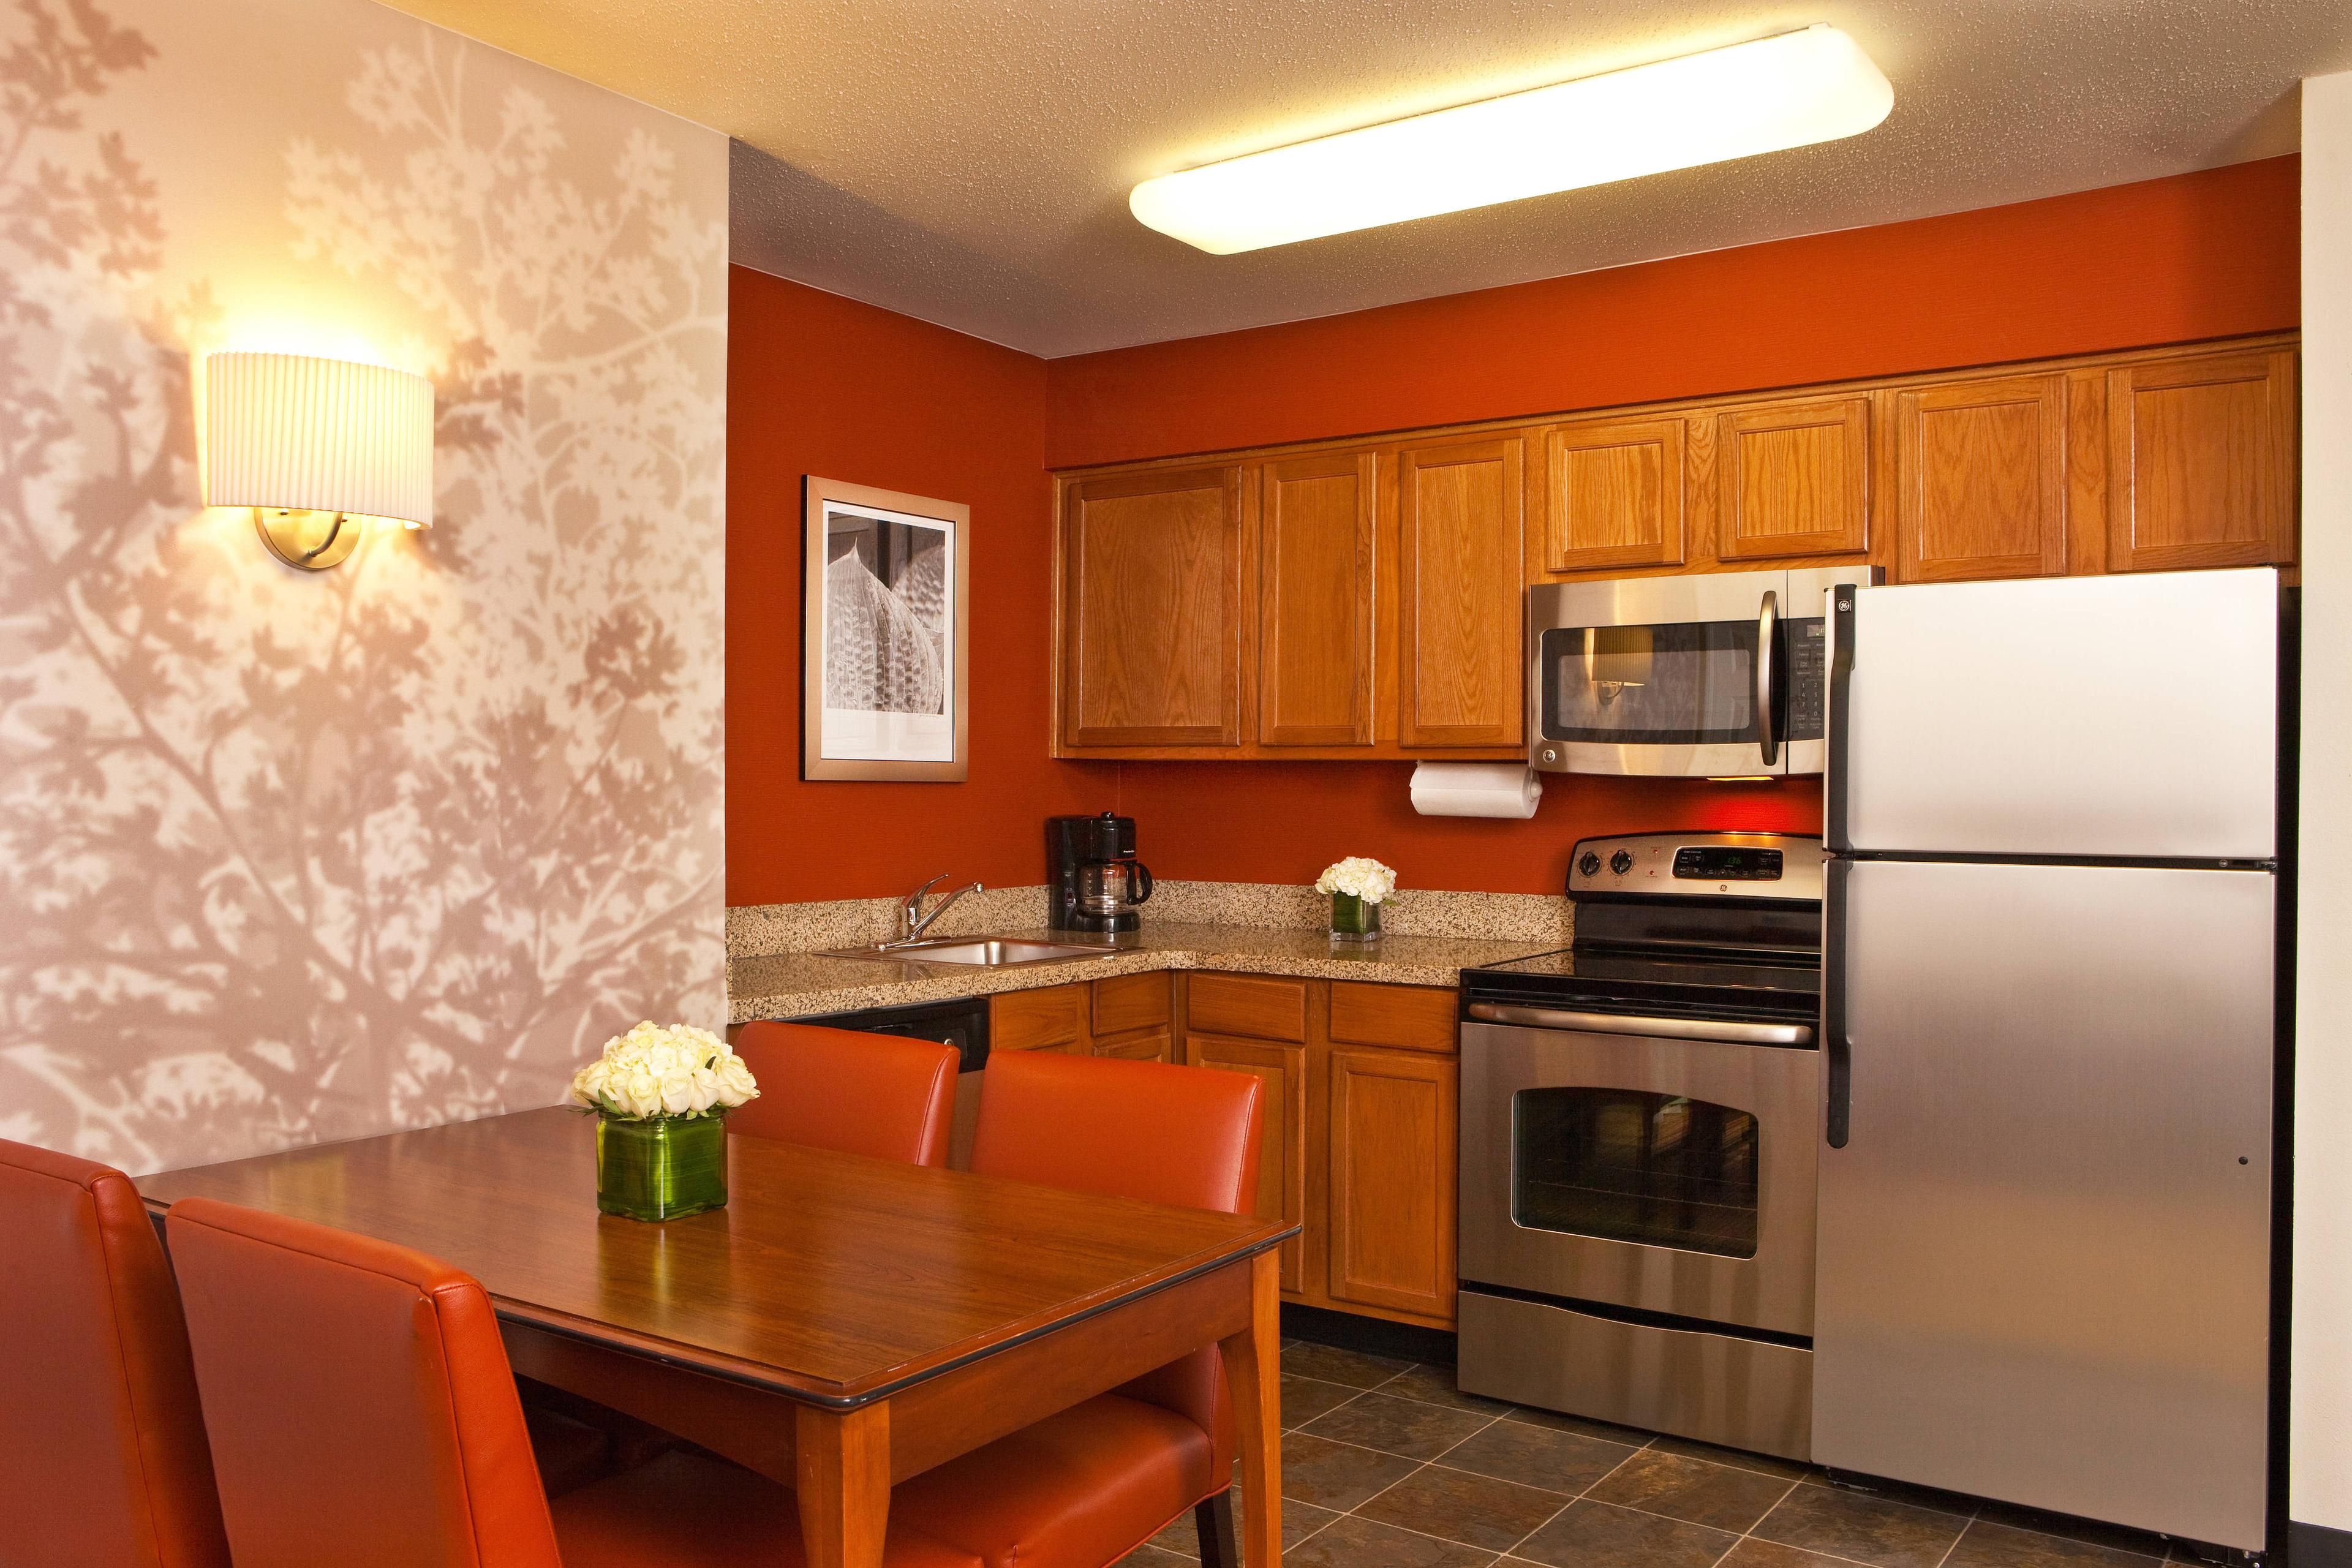 Our Two-Bedroom Suite features a fully-equipped kitchen along with a dining table that seats four people.